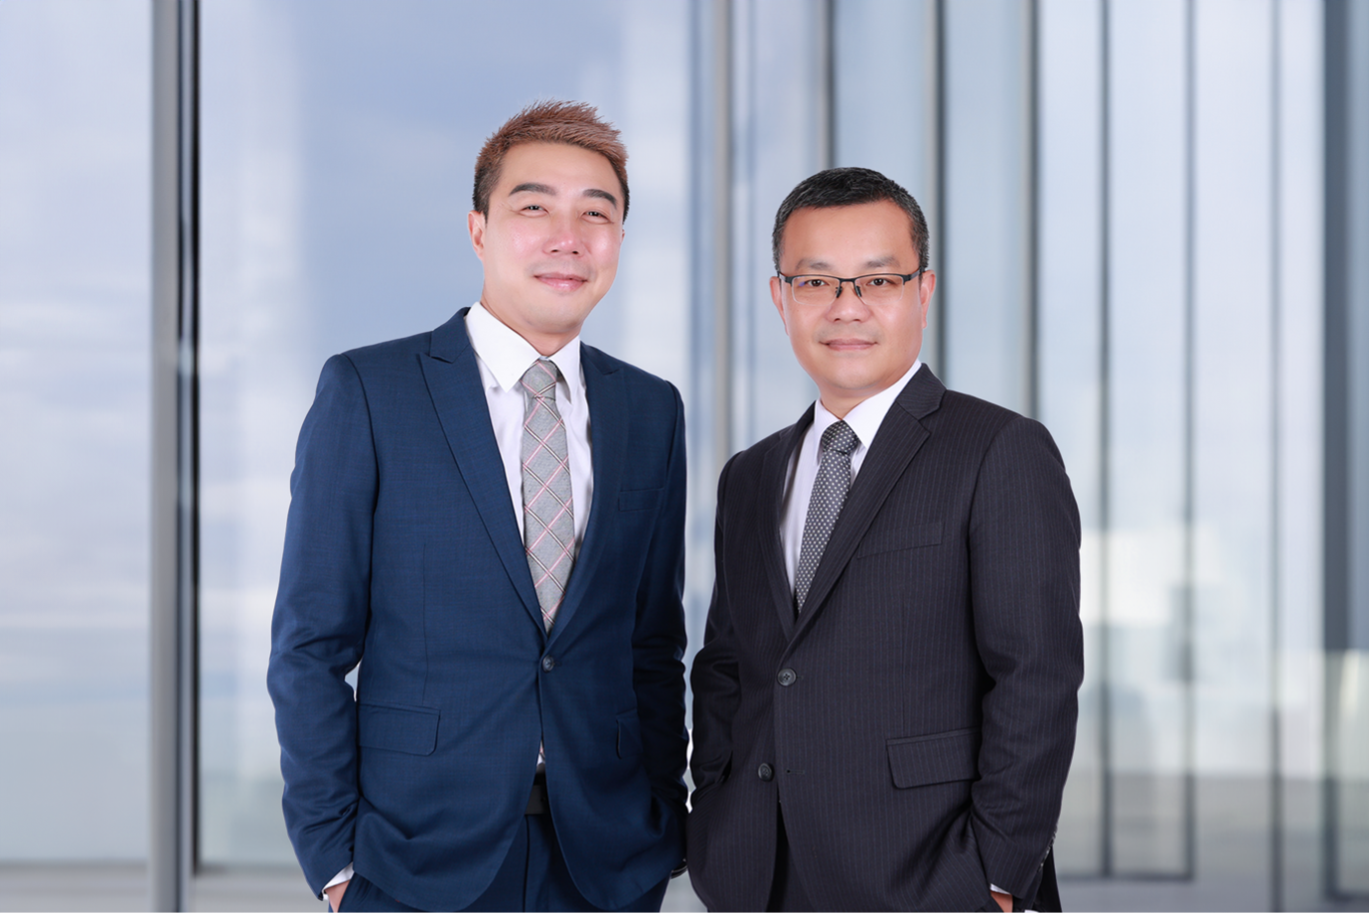 From left to right: Sam Fok, Co-Founder and COO of HKVAX and Dr. Anthony Ng, Co-Founder and CEO of HKVAX